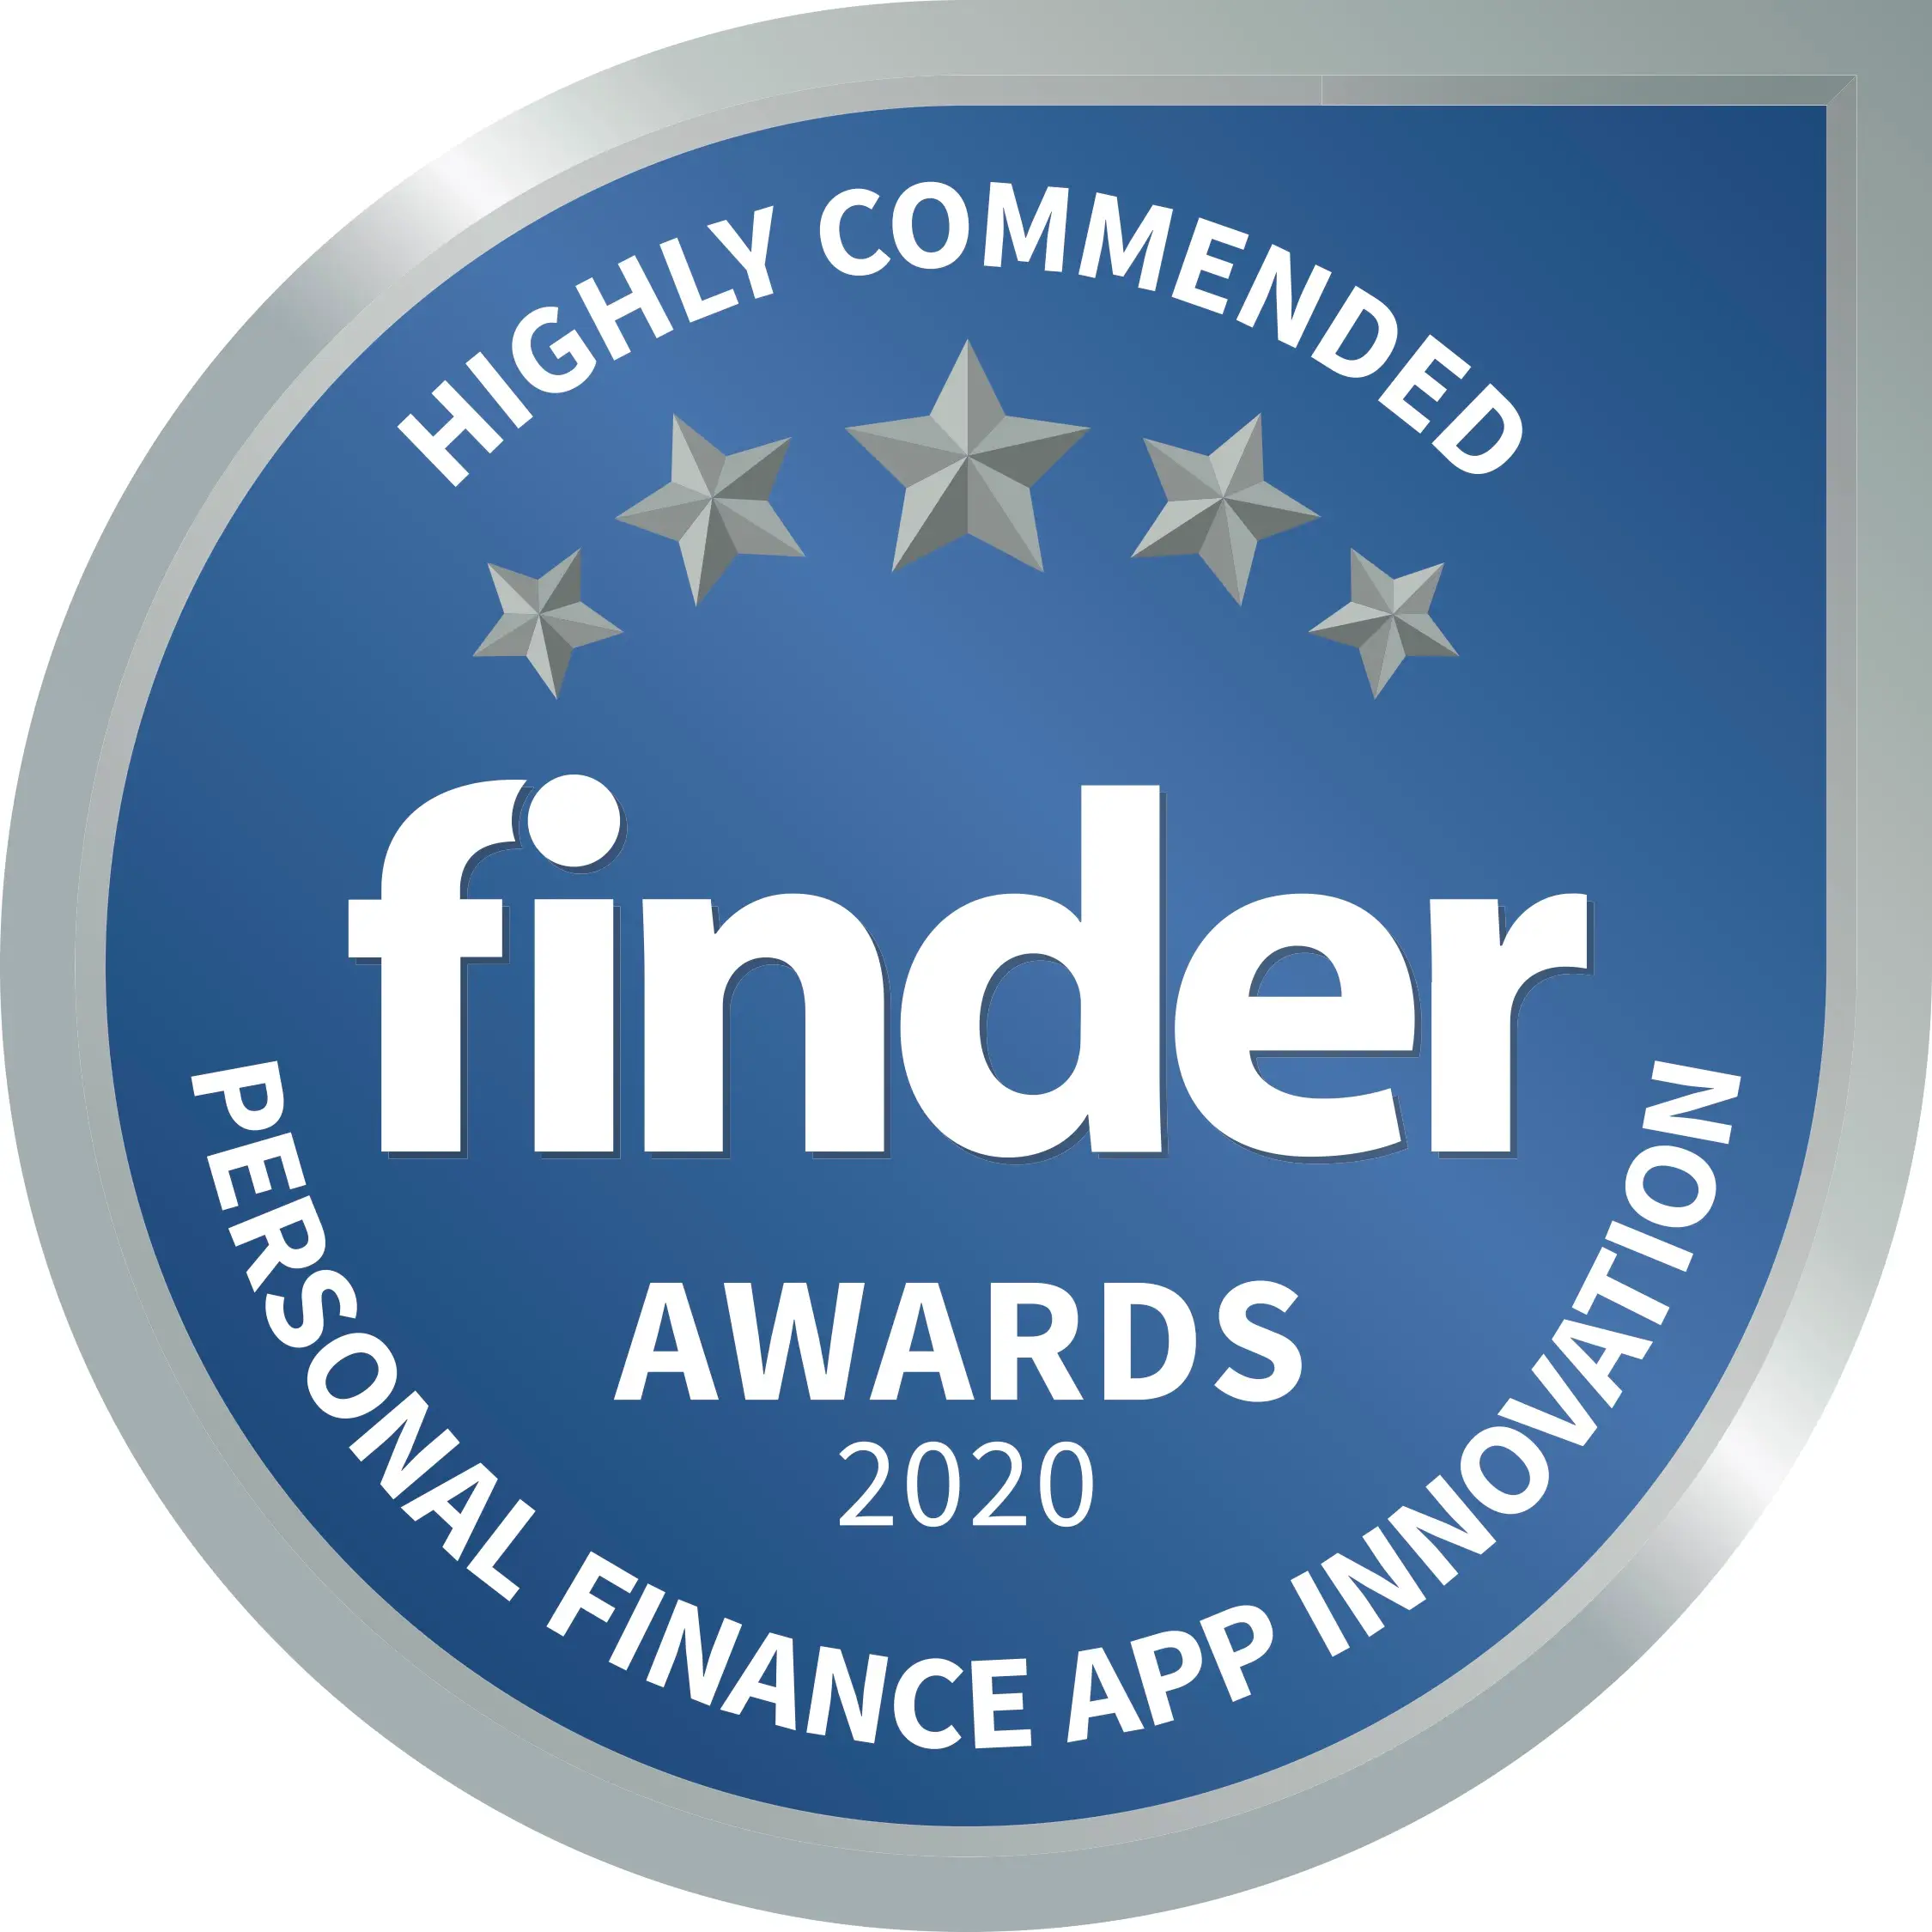 Highly commended Personal Finance App Innovation